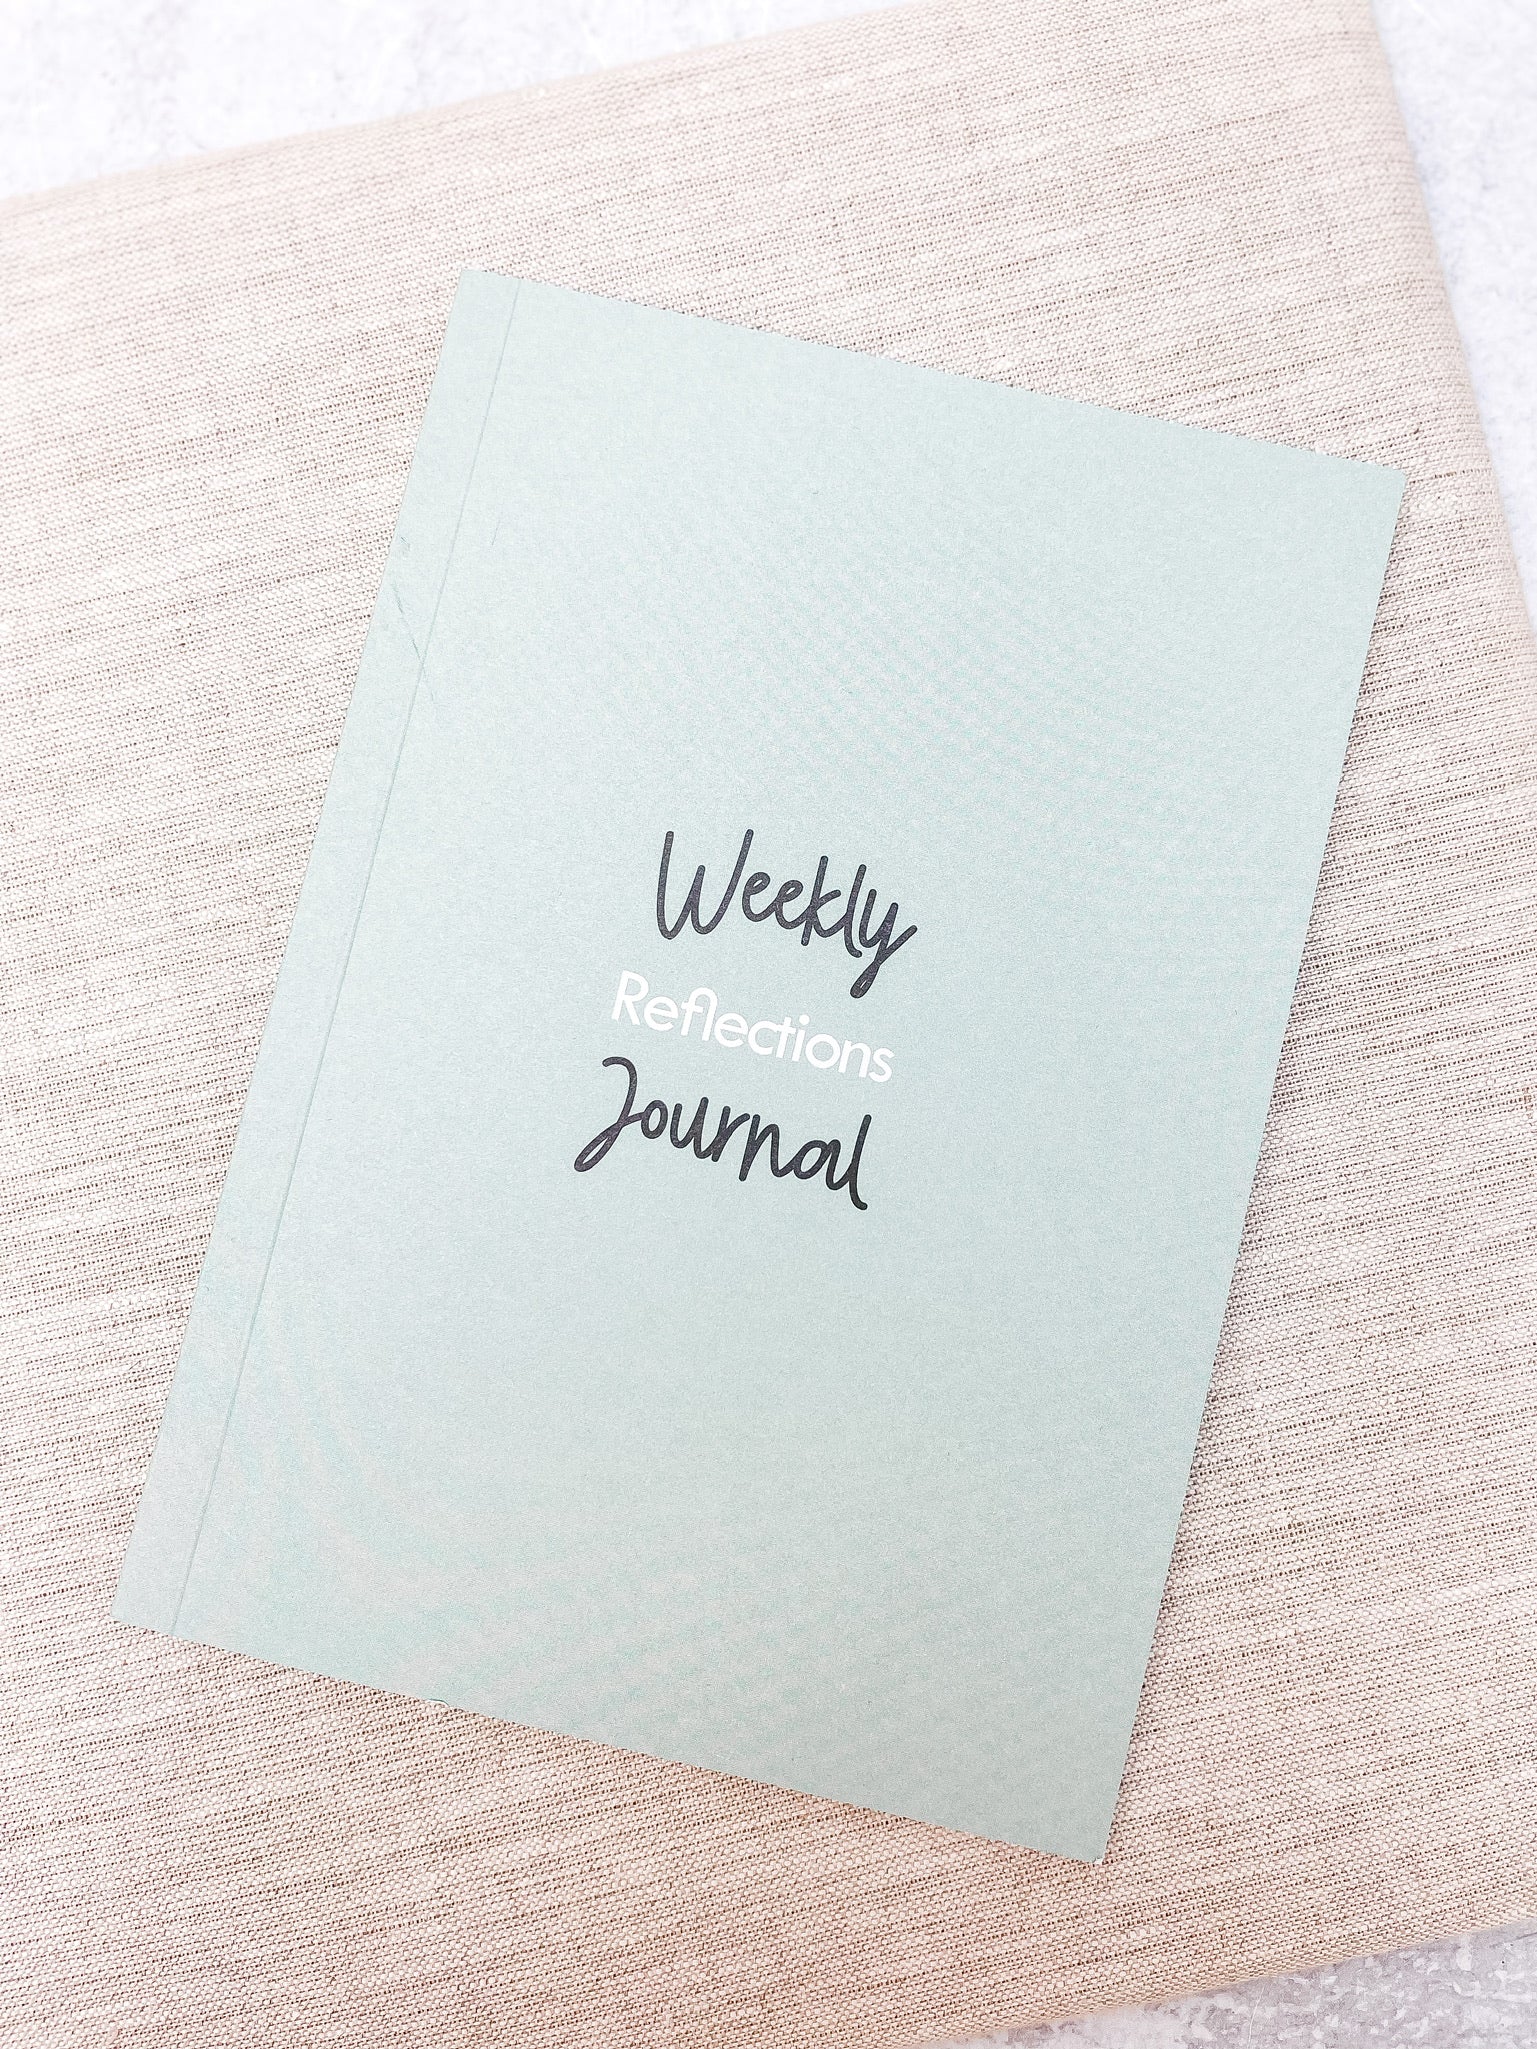 Weekly Reflections Journal